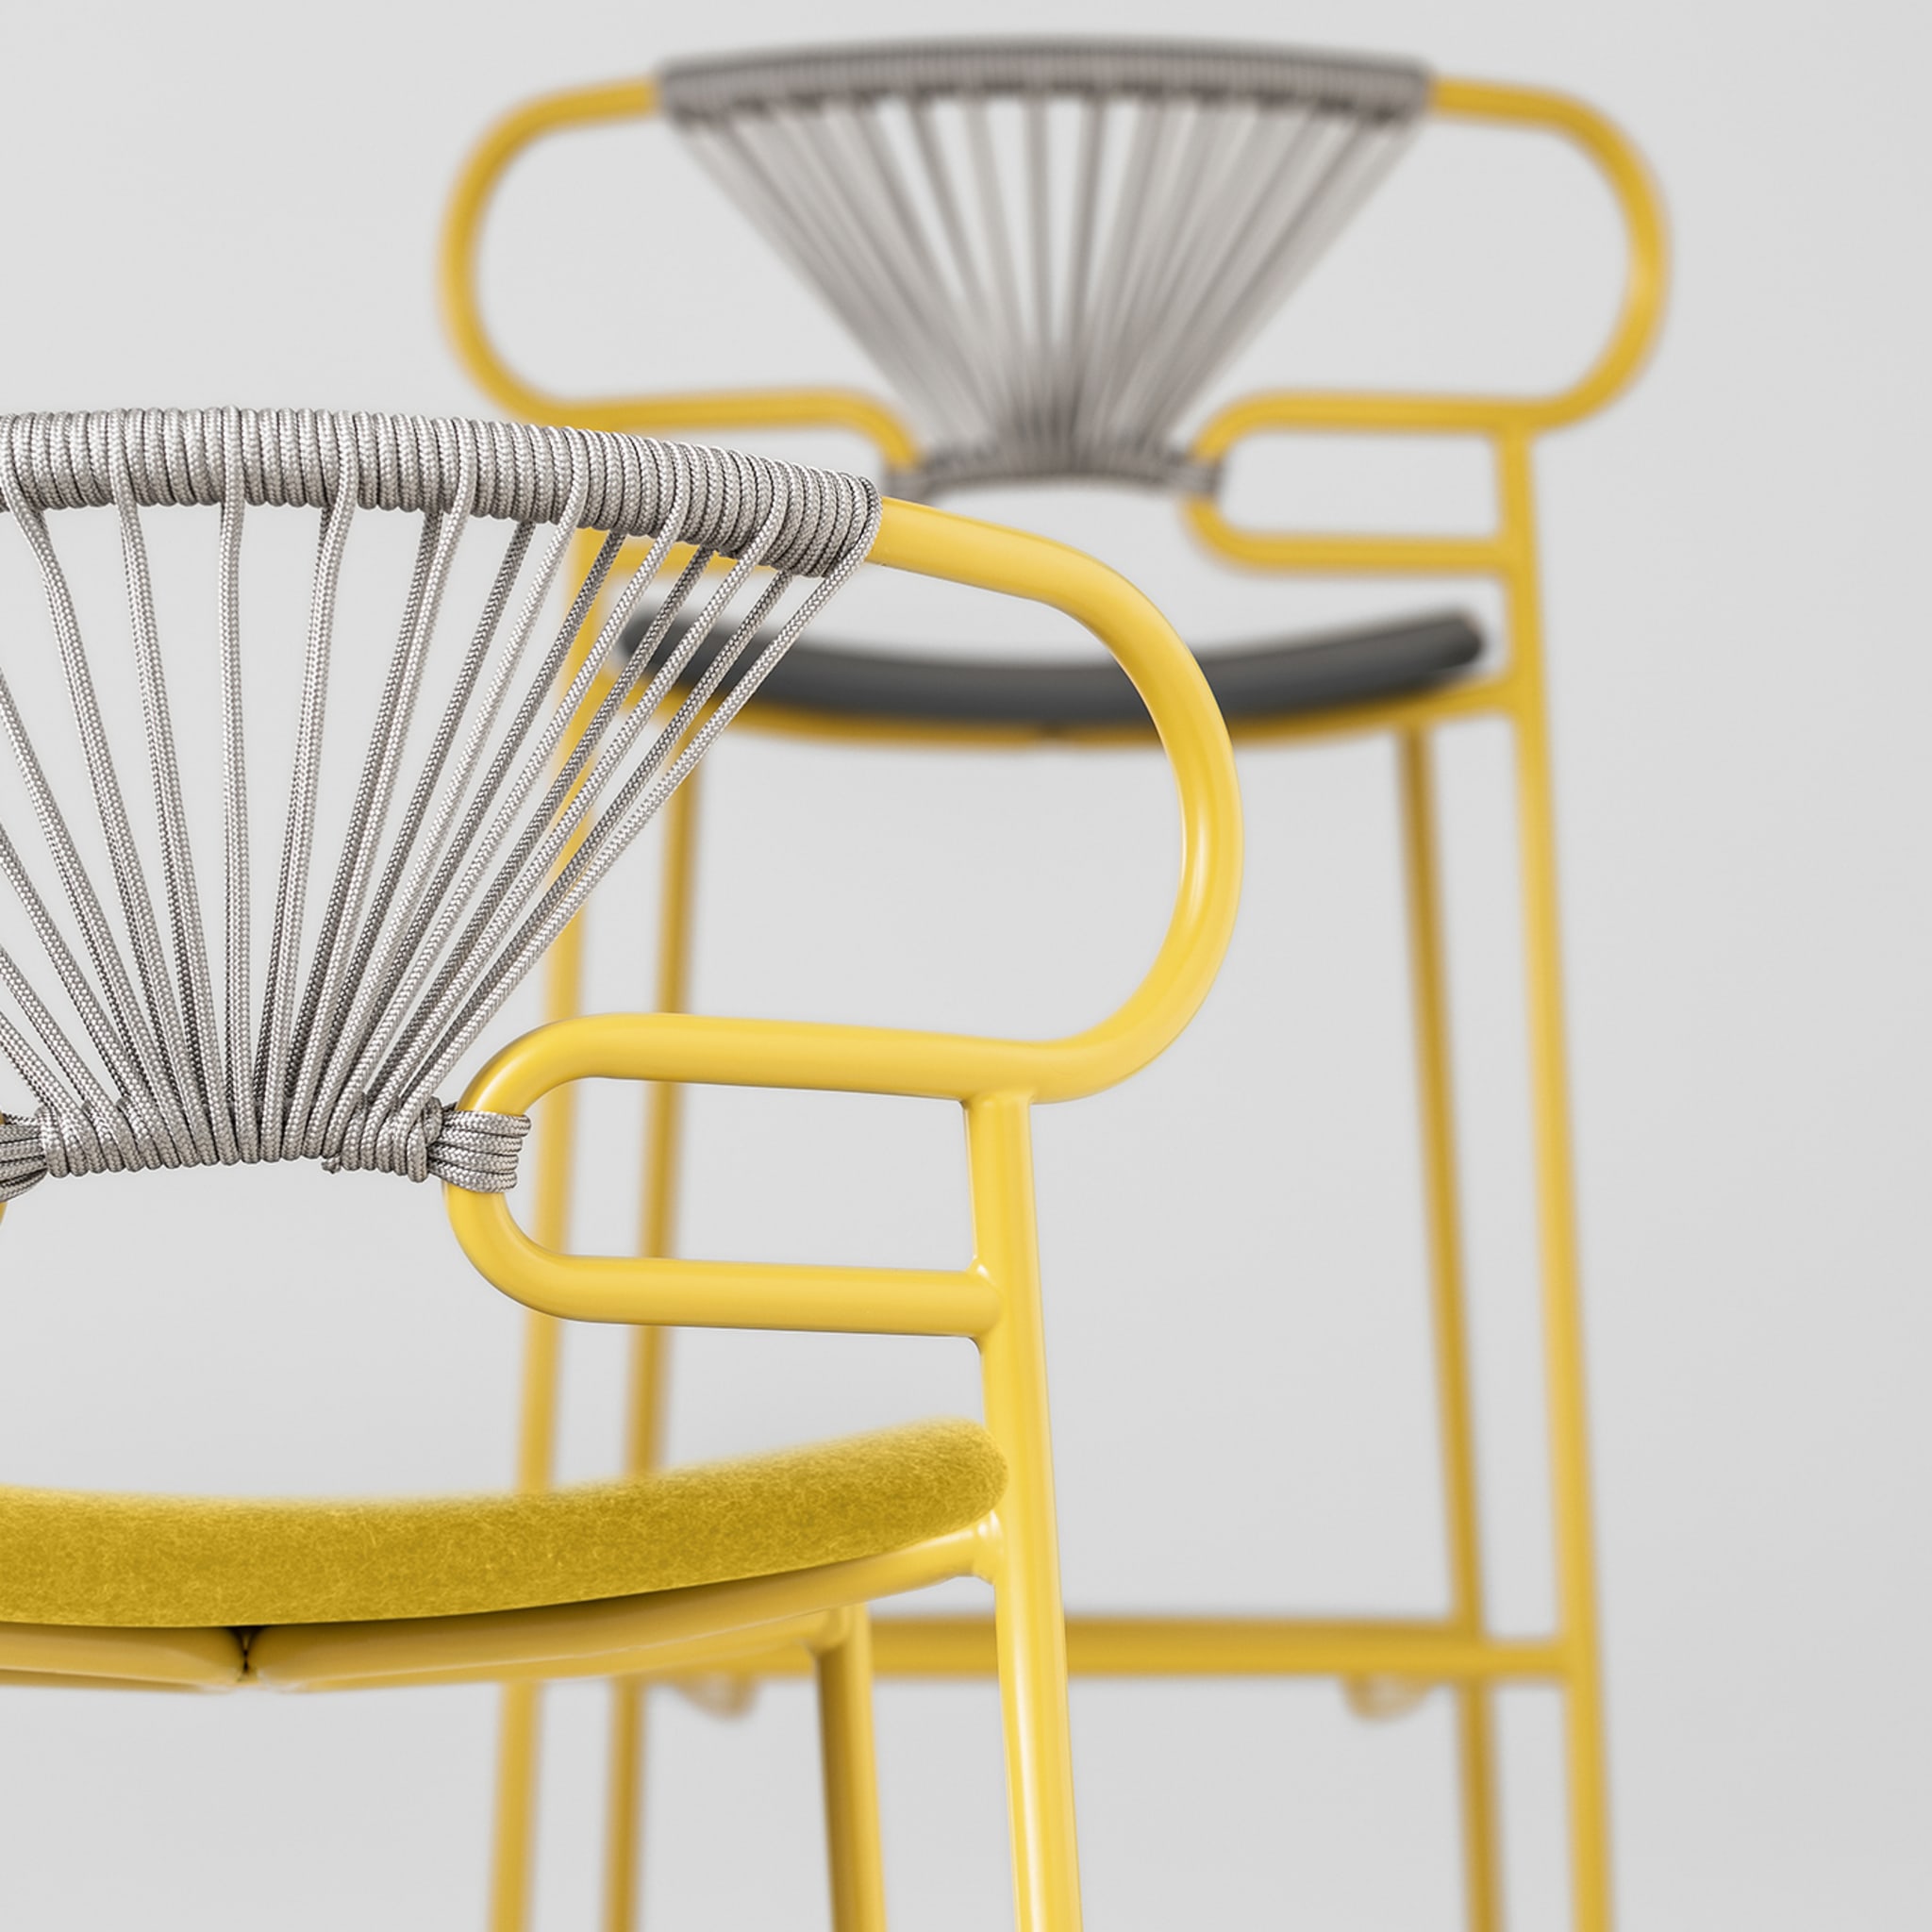 Genoa Yellow and Gray Stool by Cesare Ehr - Alternative view 1